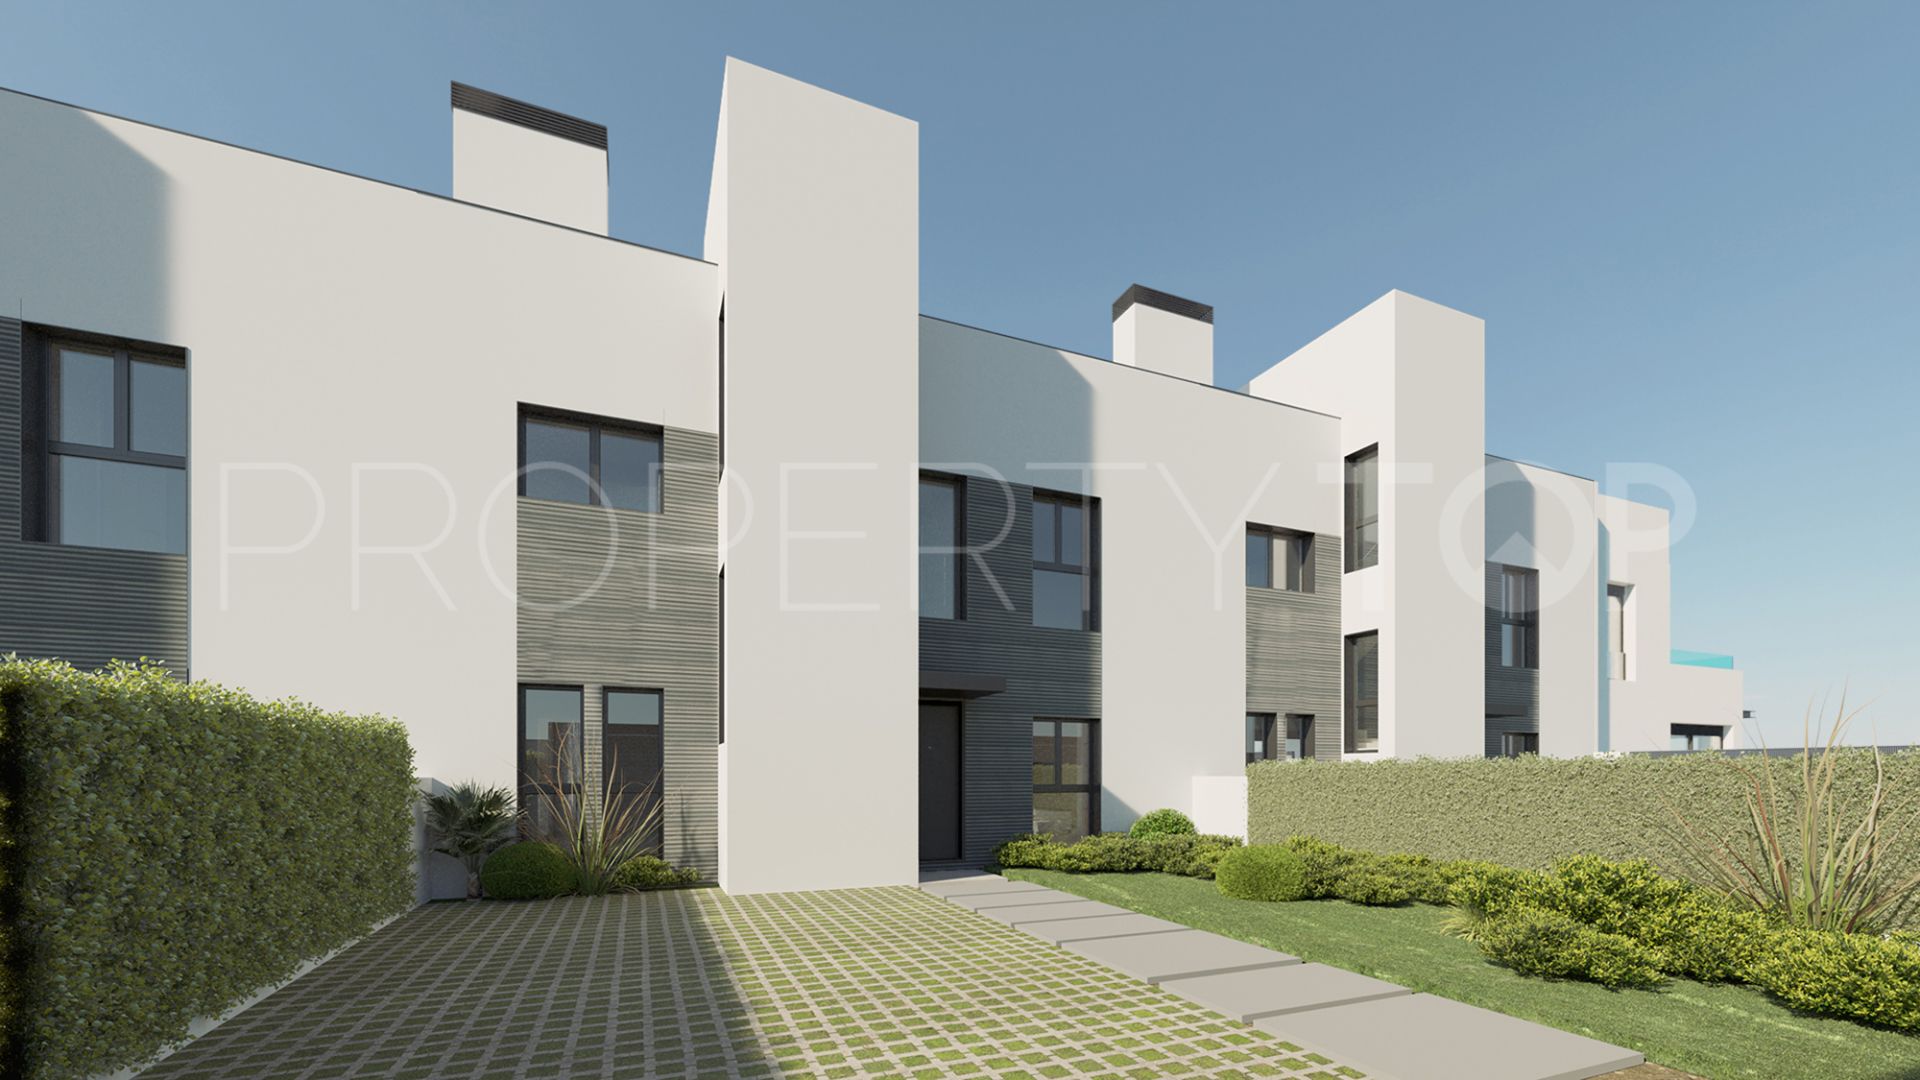 Buy Can Pastilla 4 bedrooms town house